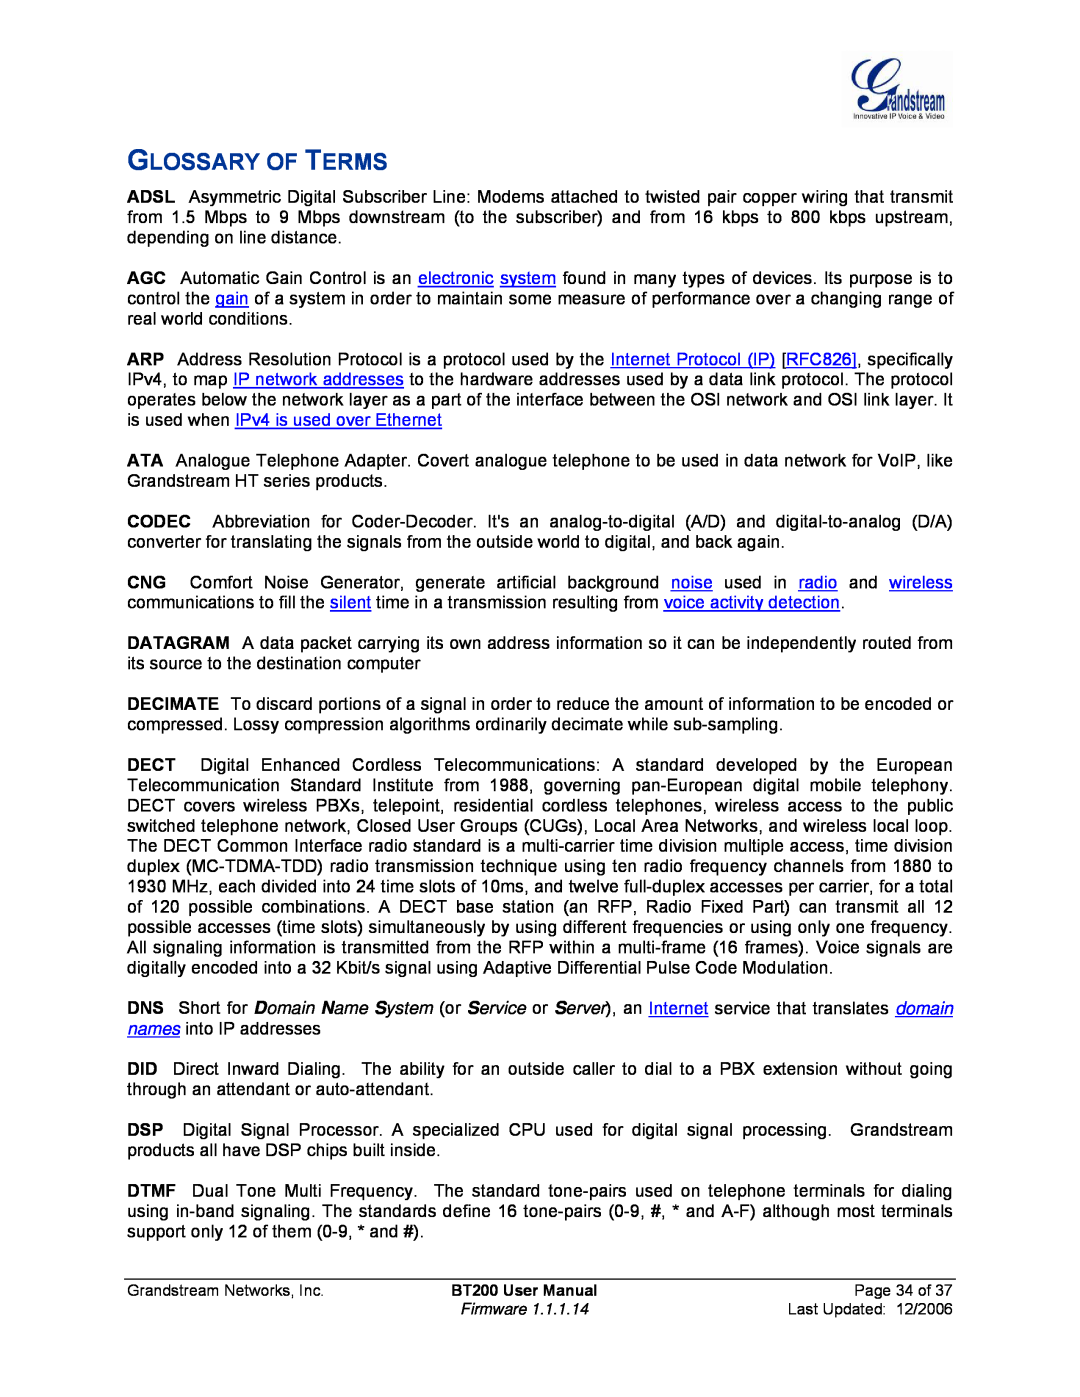 Grandstream Networks BT200 user manual Glossary Of Terms 